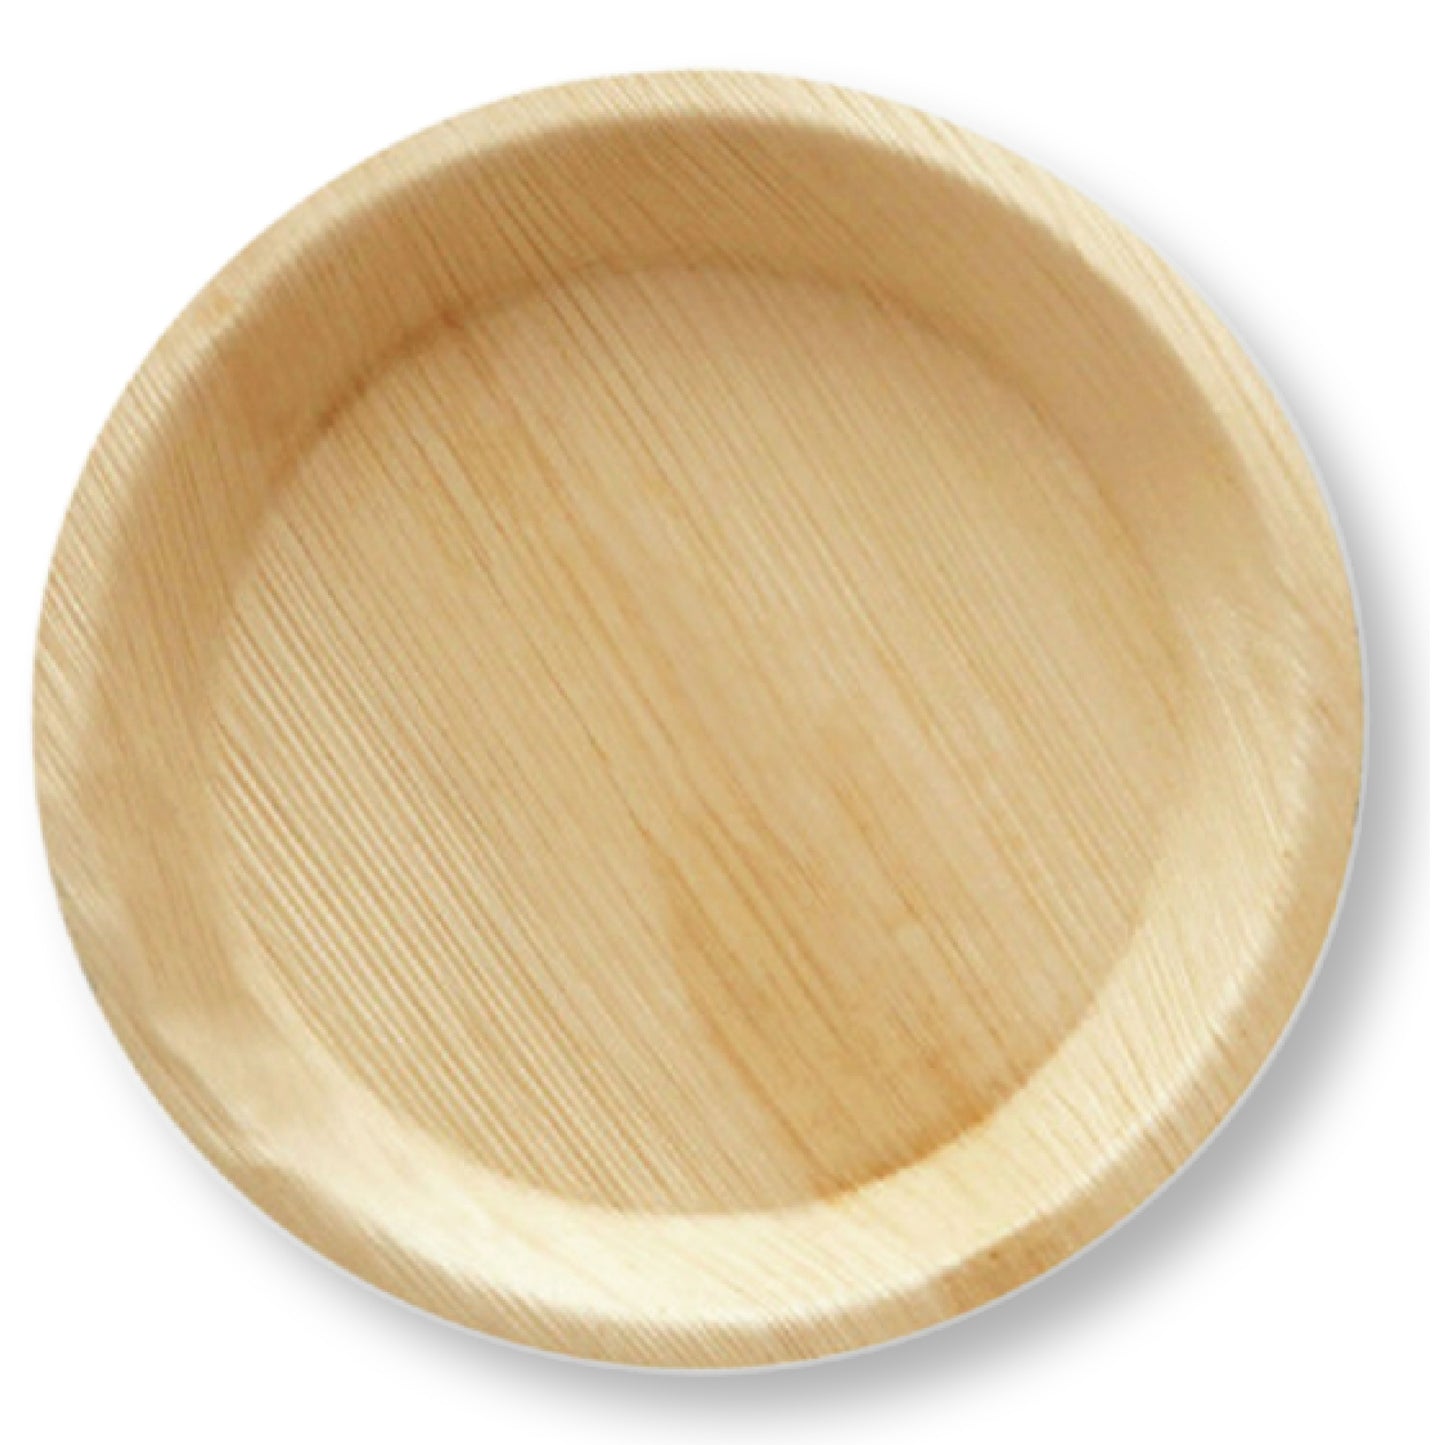 Disposable Stylish Palm Leaf Plates are a unique alternative to other disposable tableware on the market.  Chemical-free / Non-toxic• Biodegradable / Compostable• Microwave Safe• Oven Safe• Refrigerator safe